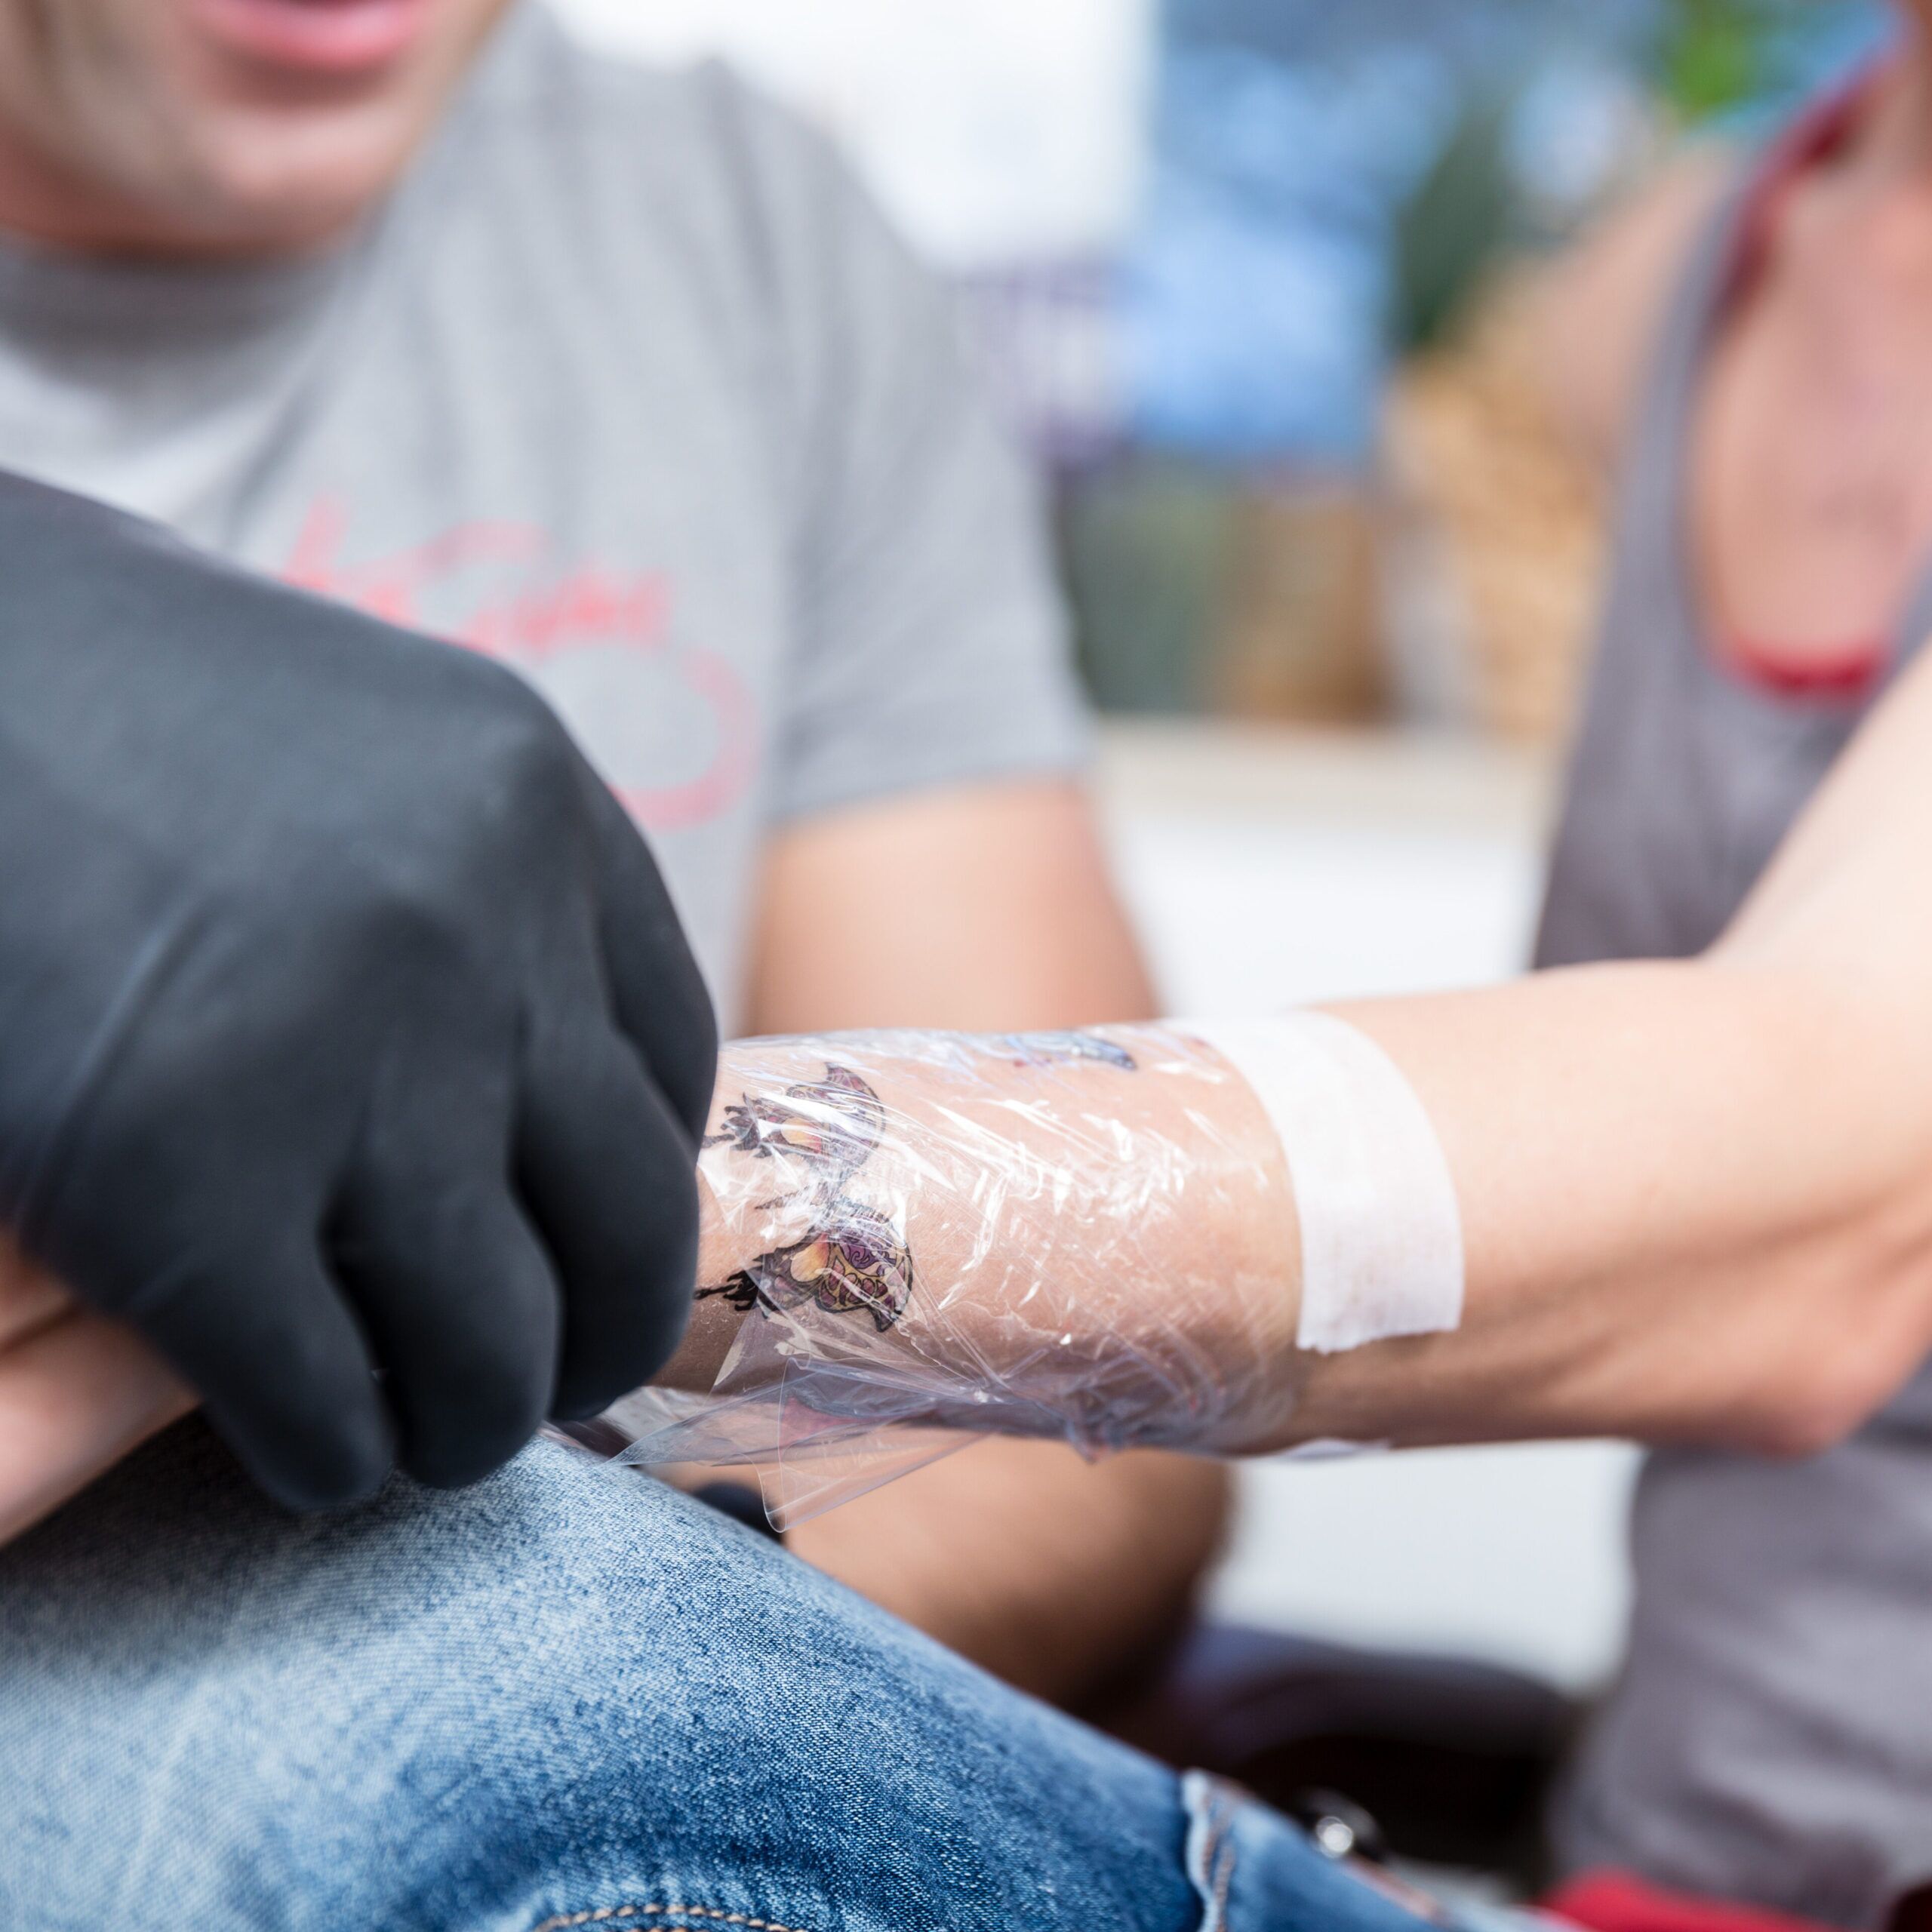 Tattoo Blowout: Appearance, Treatments, and More